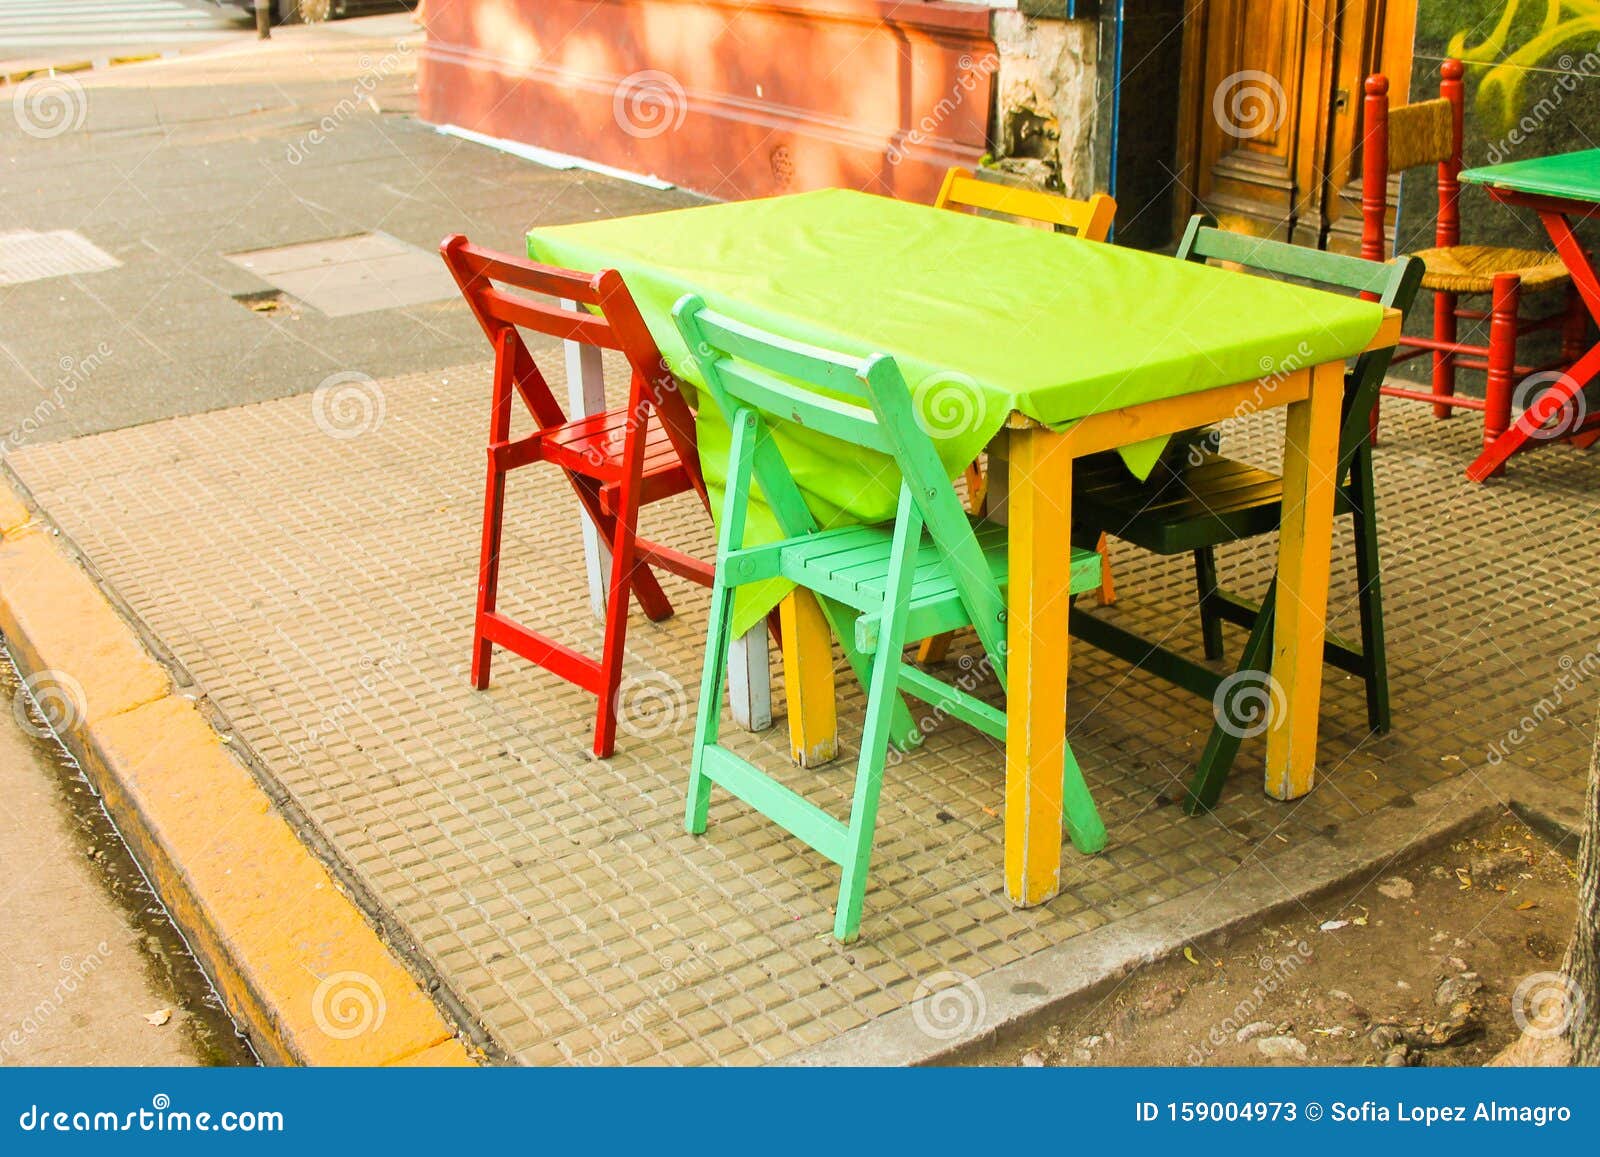 Vintage Chairs Restaurant Shop Colourful Sale Style Stock Image